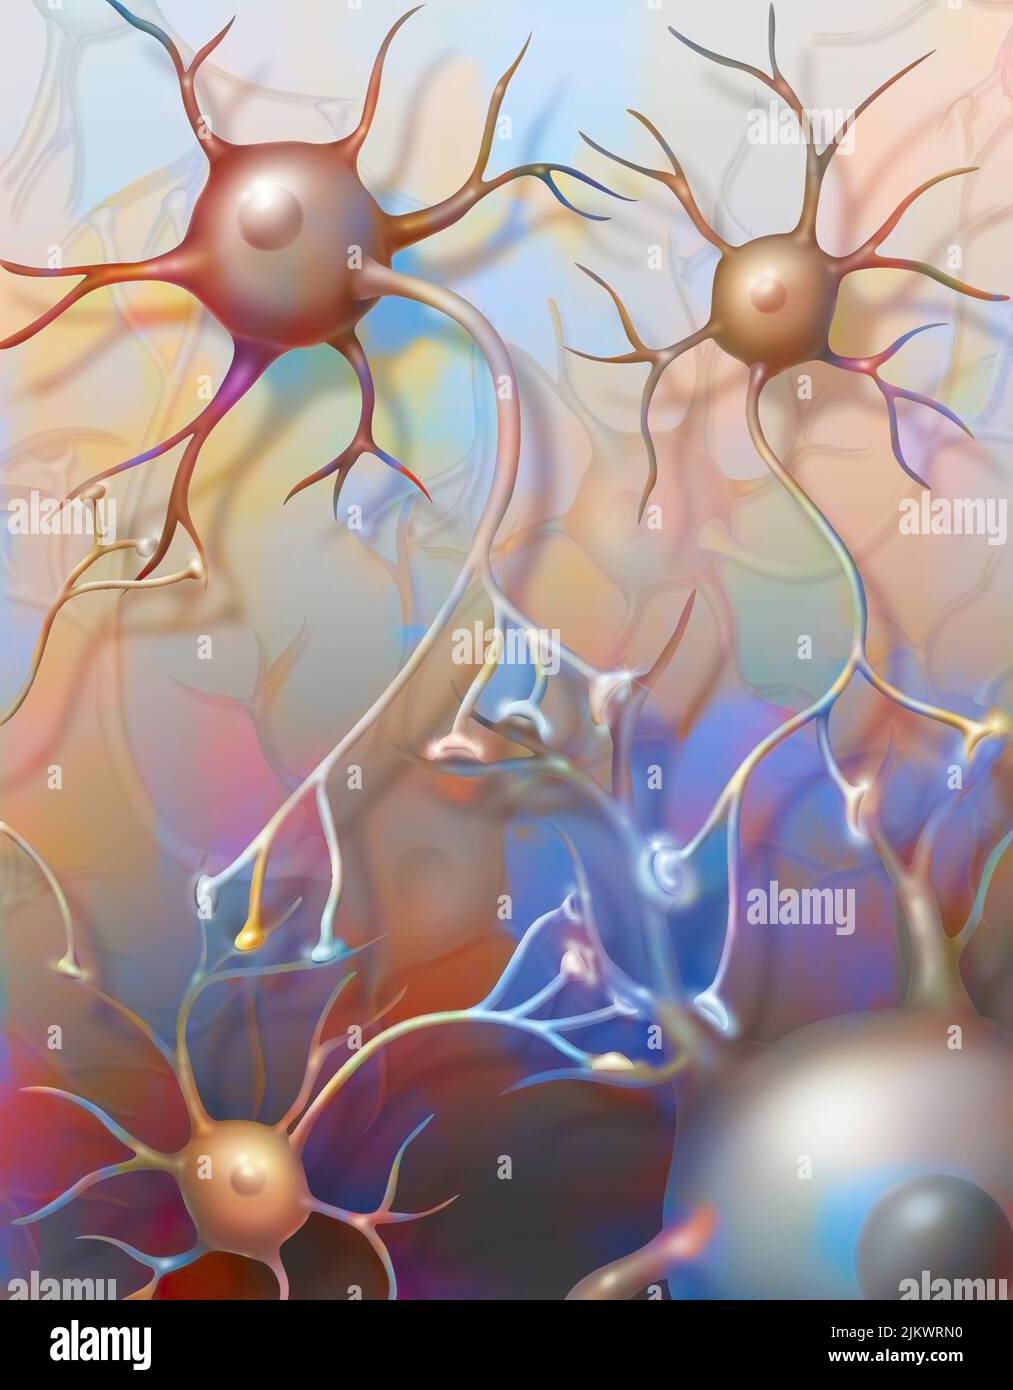 Connected neurons showing the transmission of nerve impulses. Stock Photo